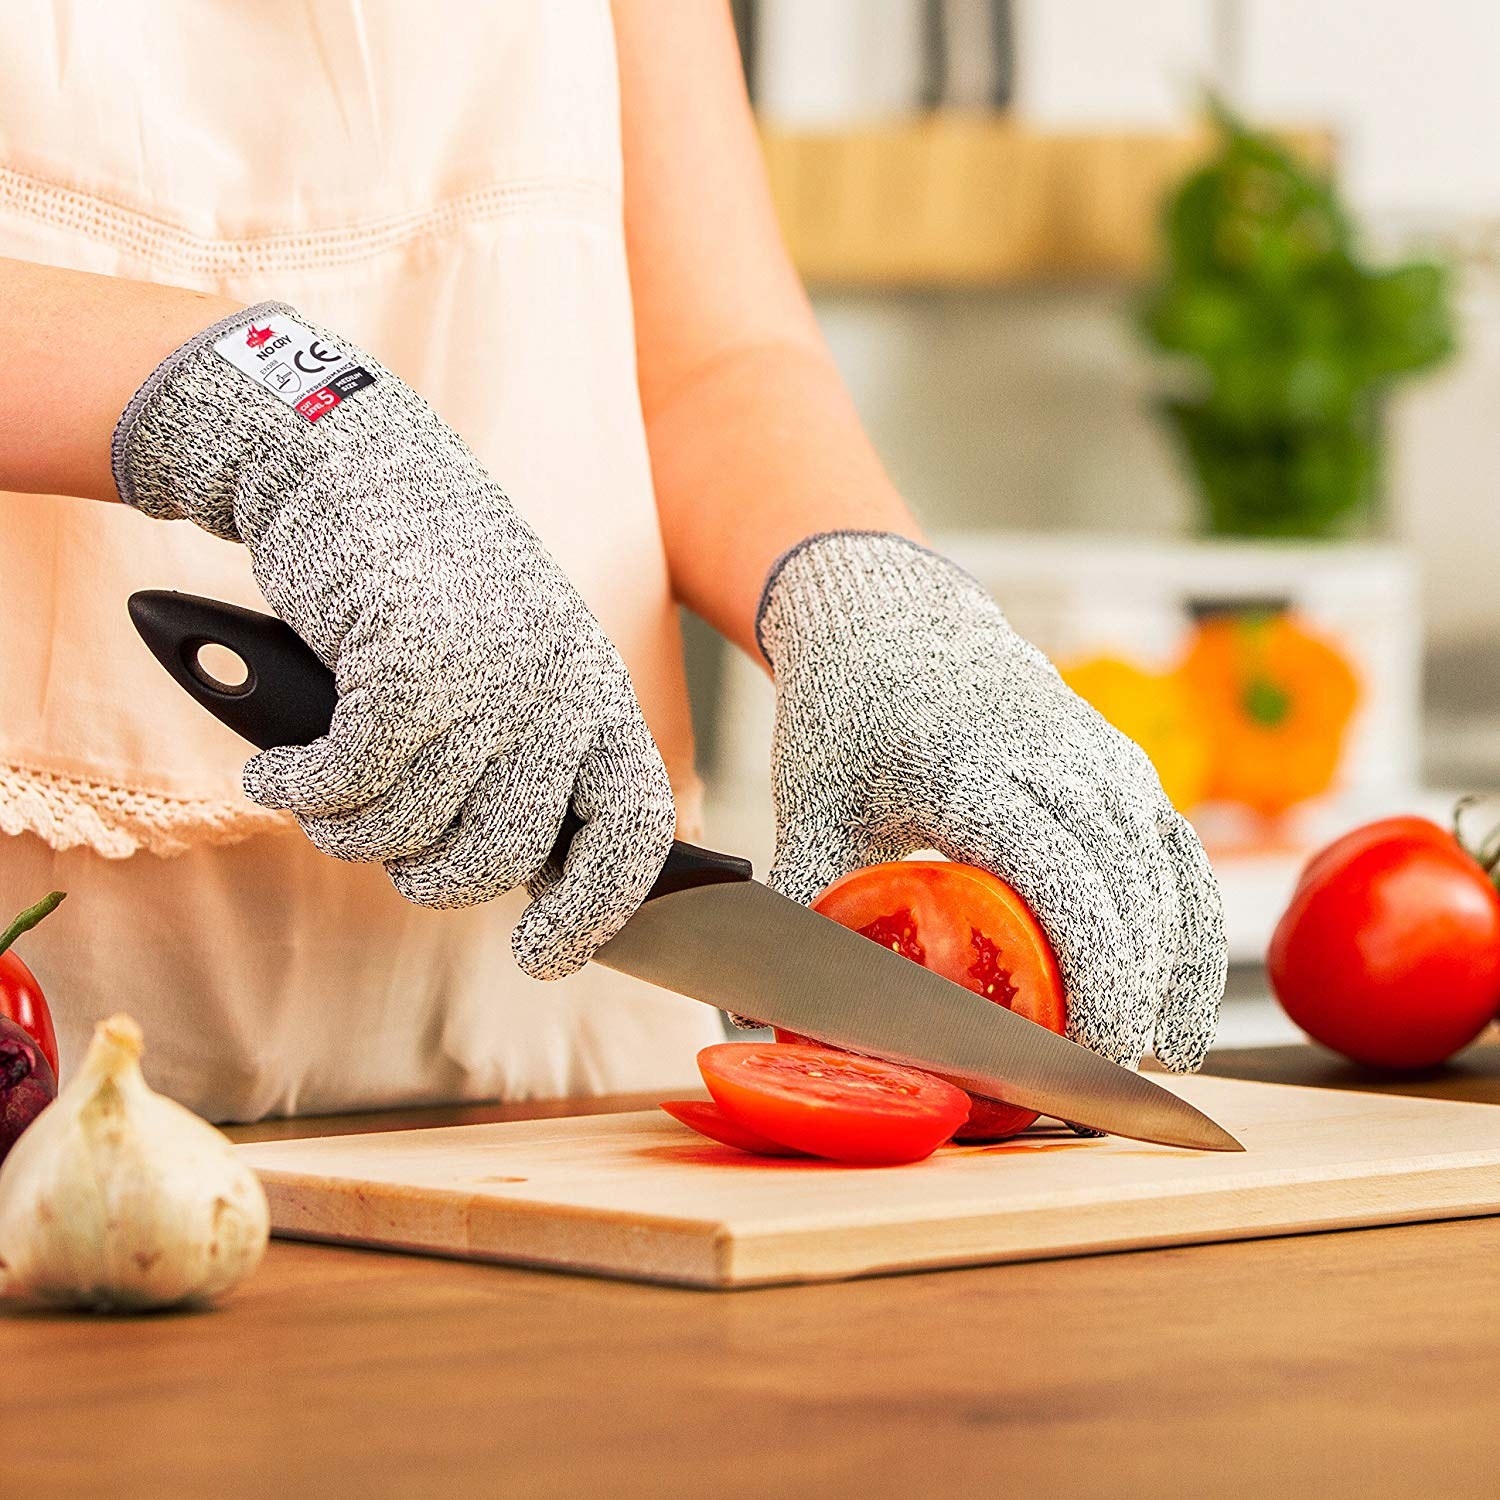 person wearing the gloves while slicing a tomato with a knife